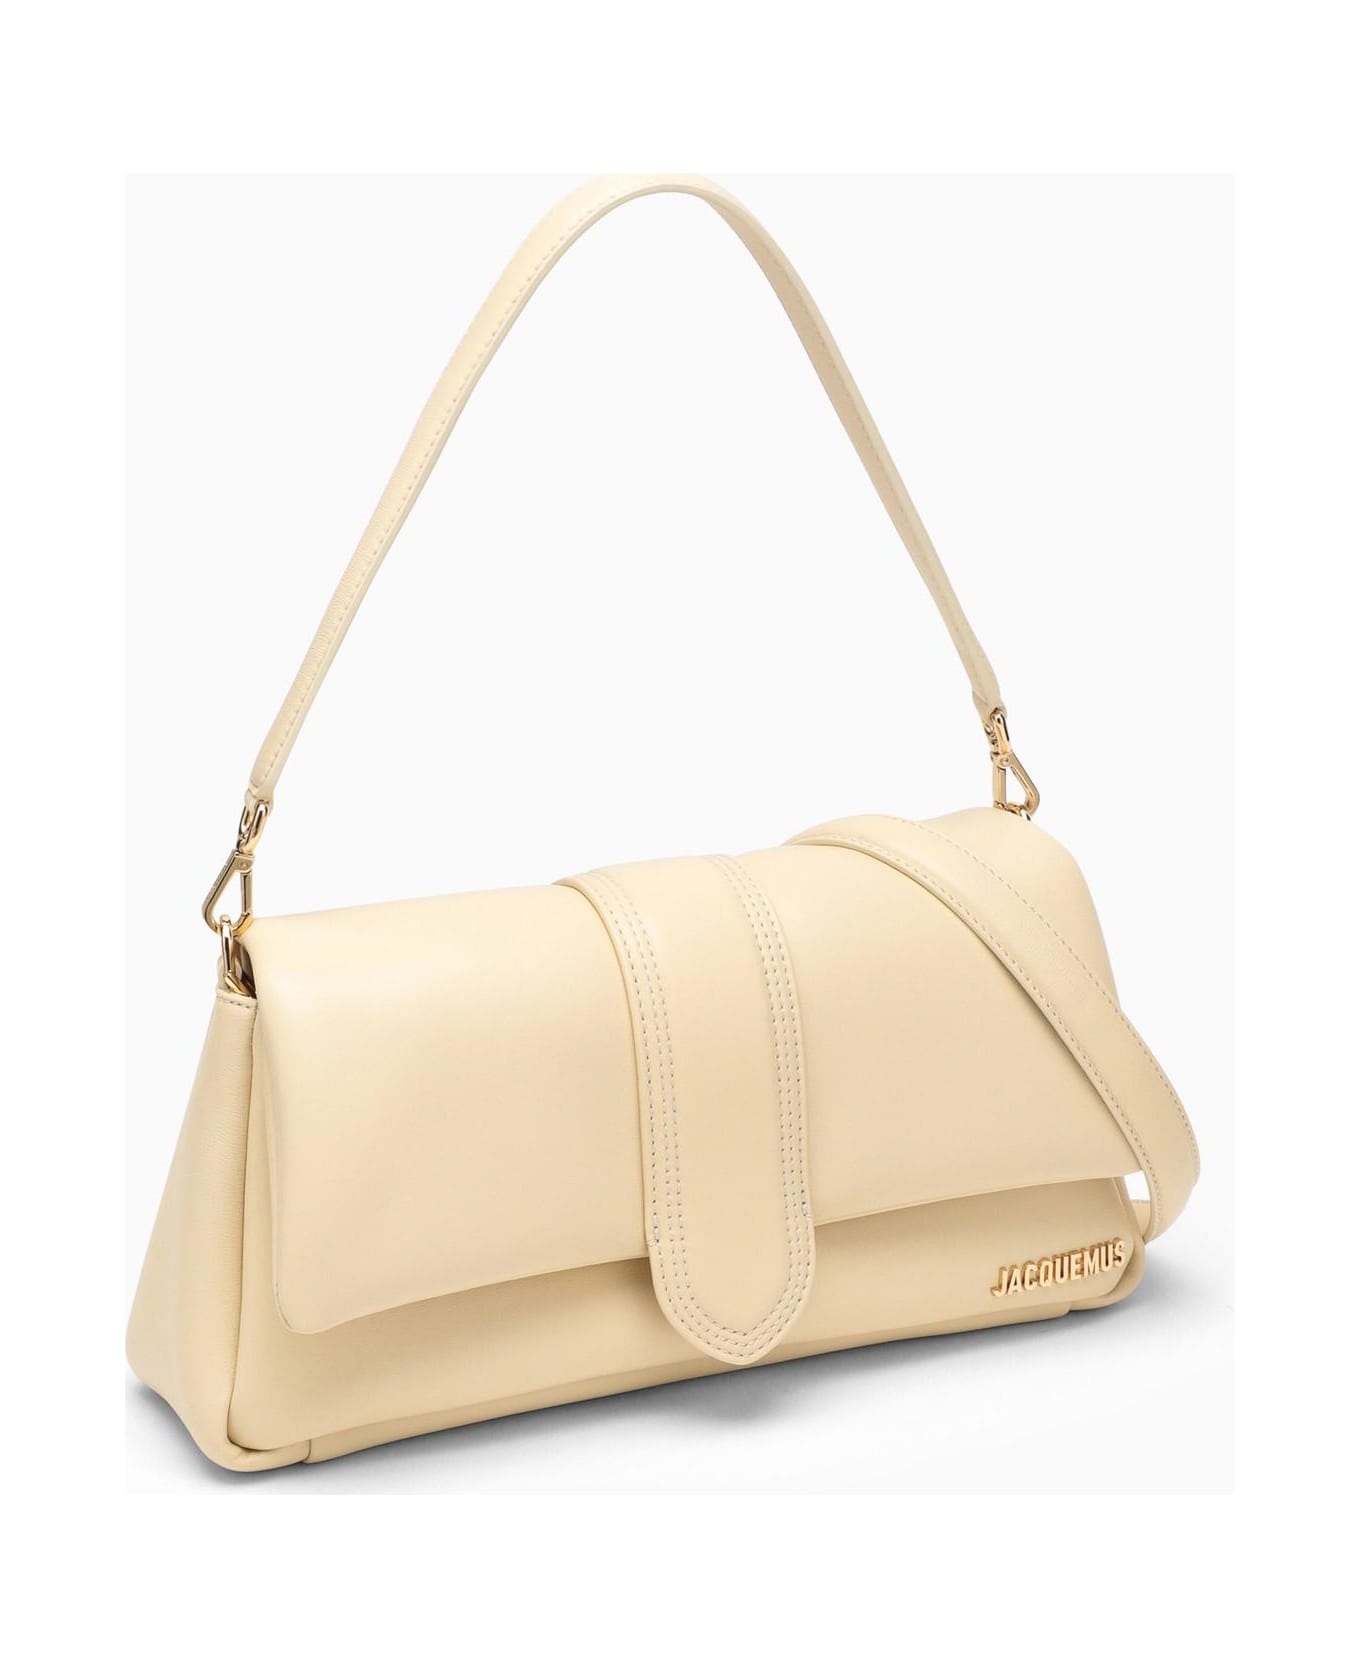 Jacquemus Le Bambimou Ivory Leather Bag - 120 IVORY トートバッグ